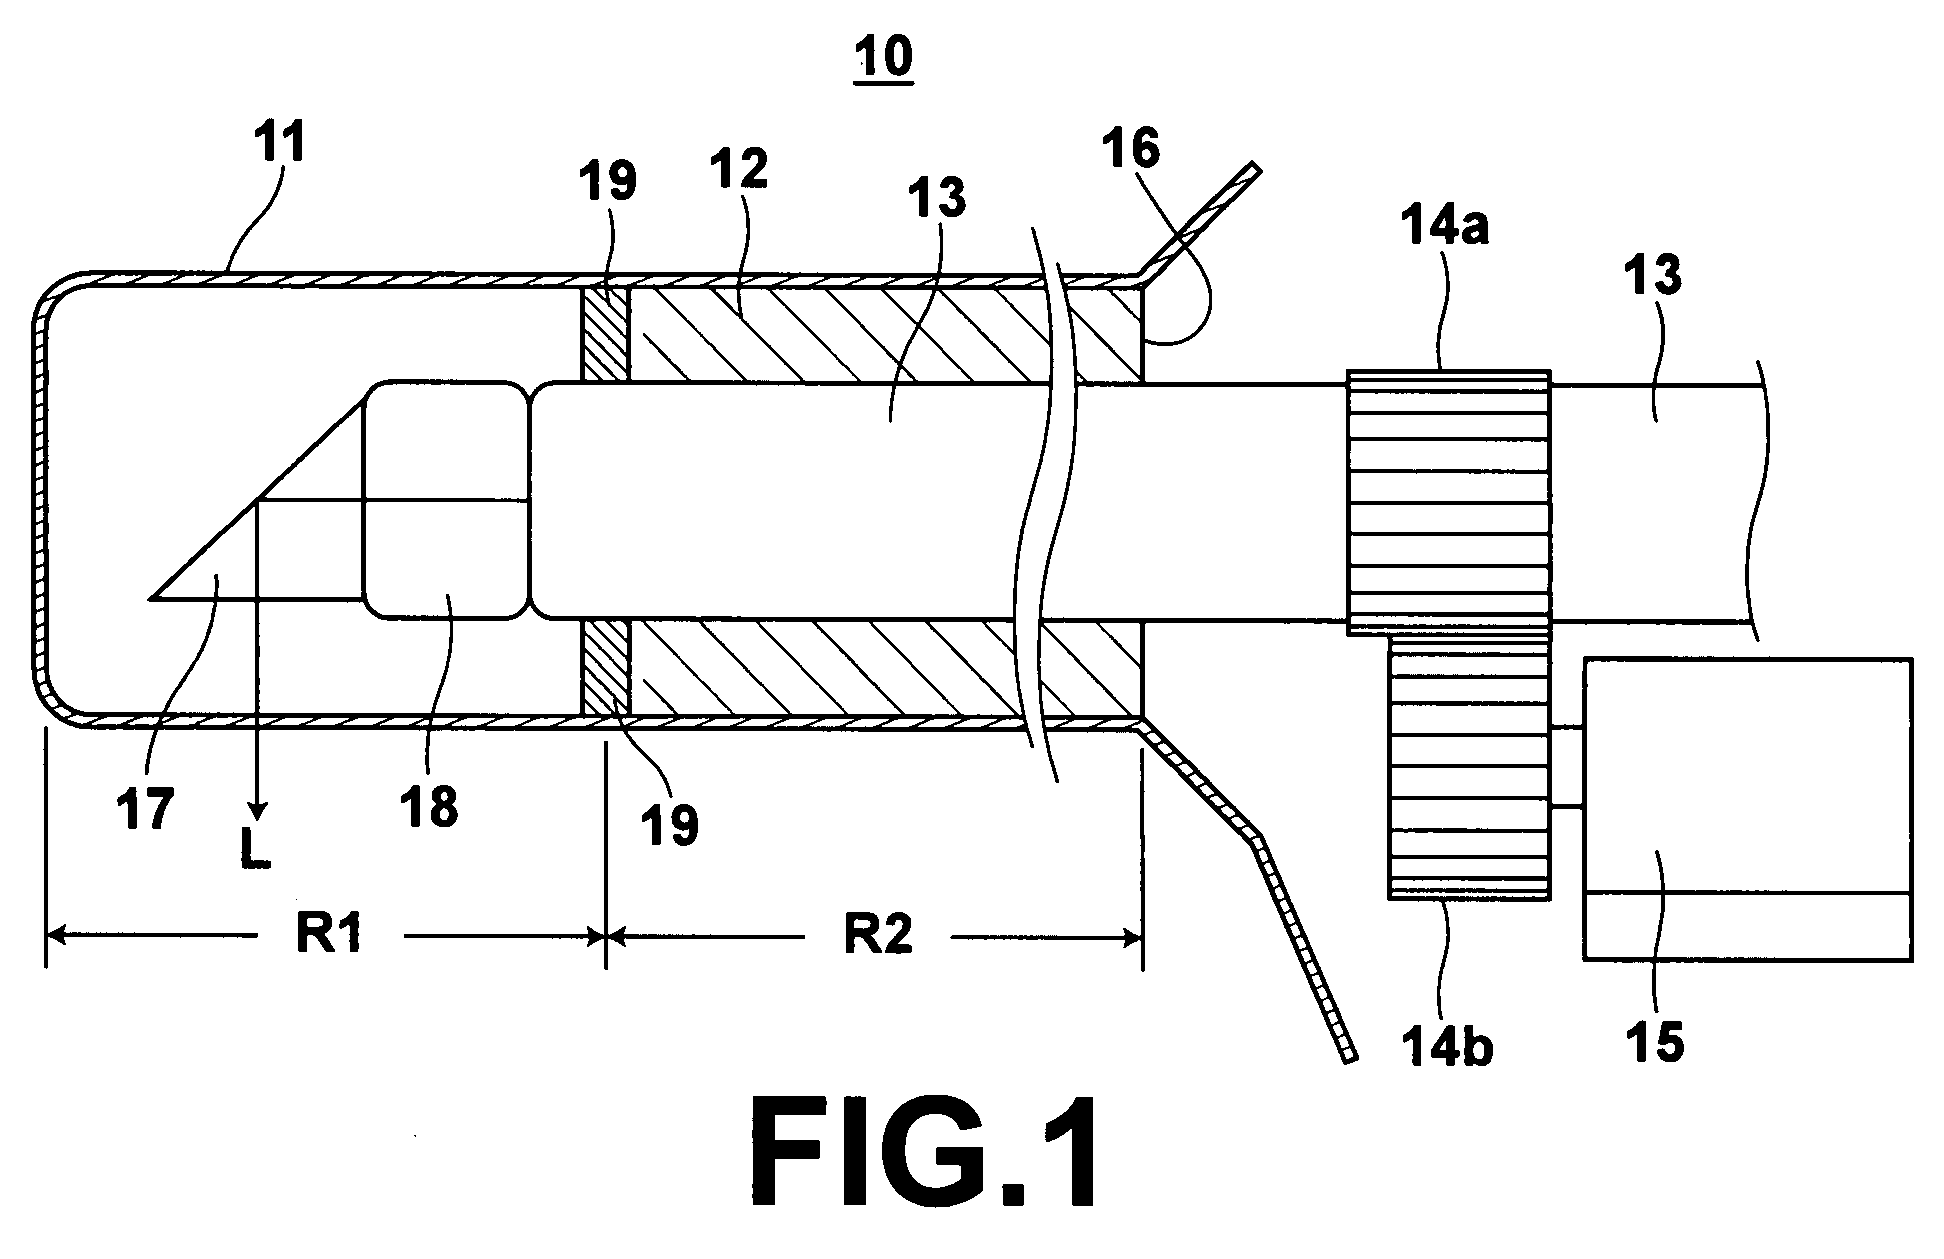 Probe and optical tomography system